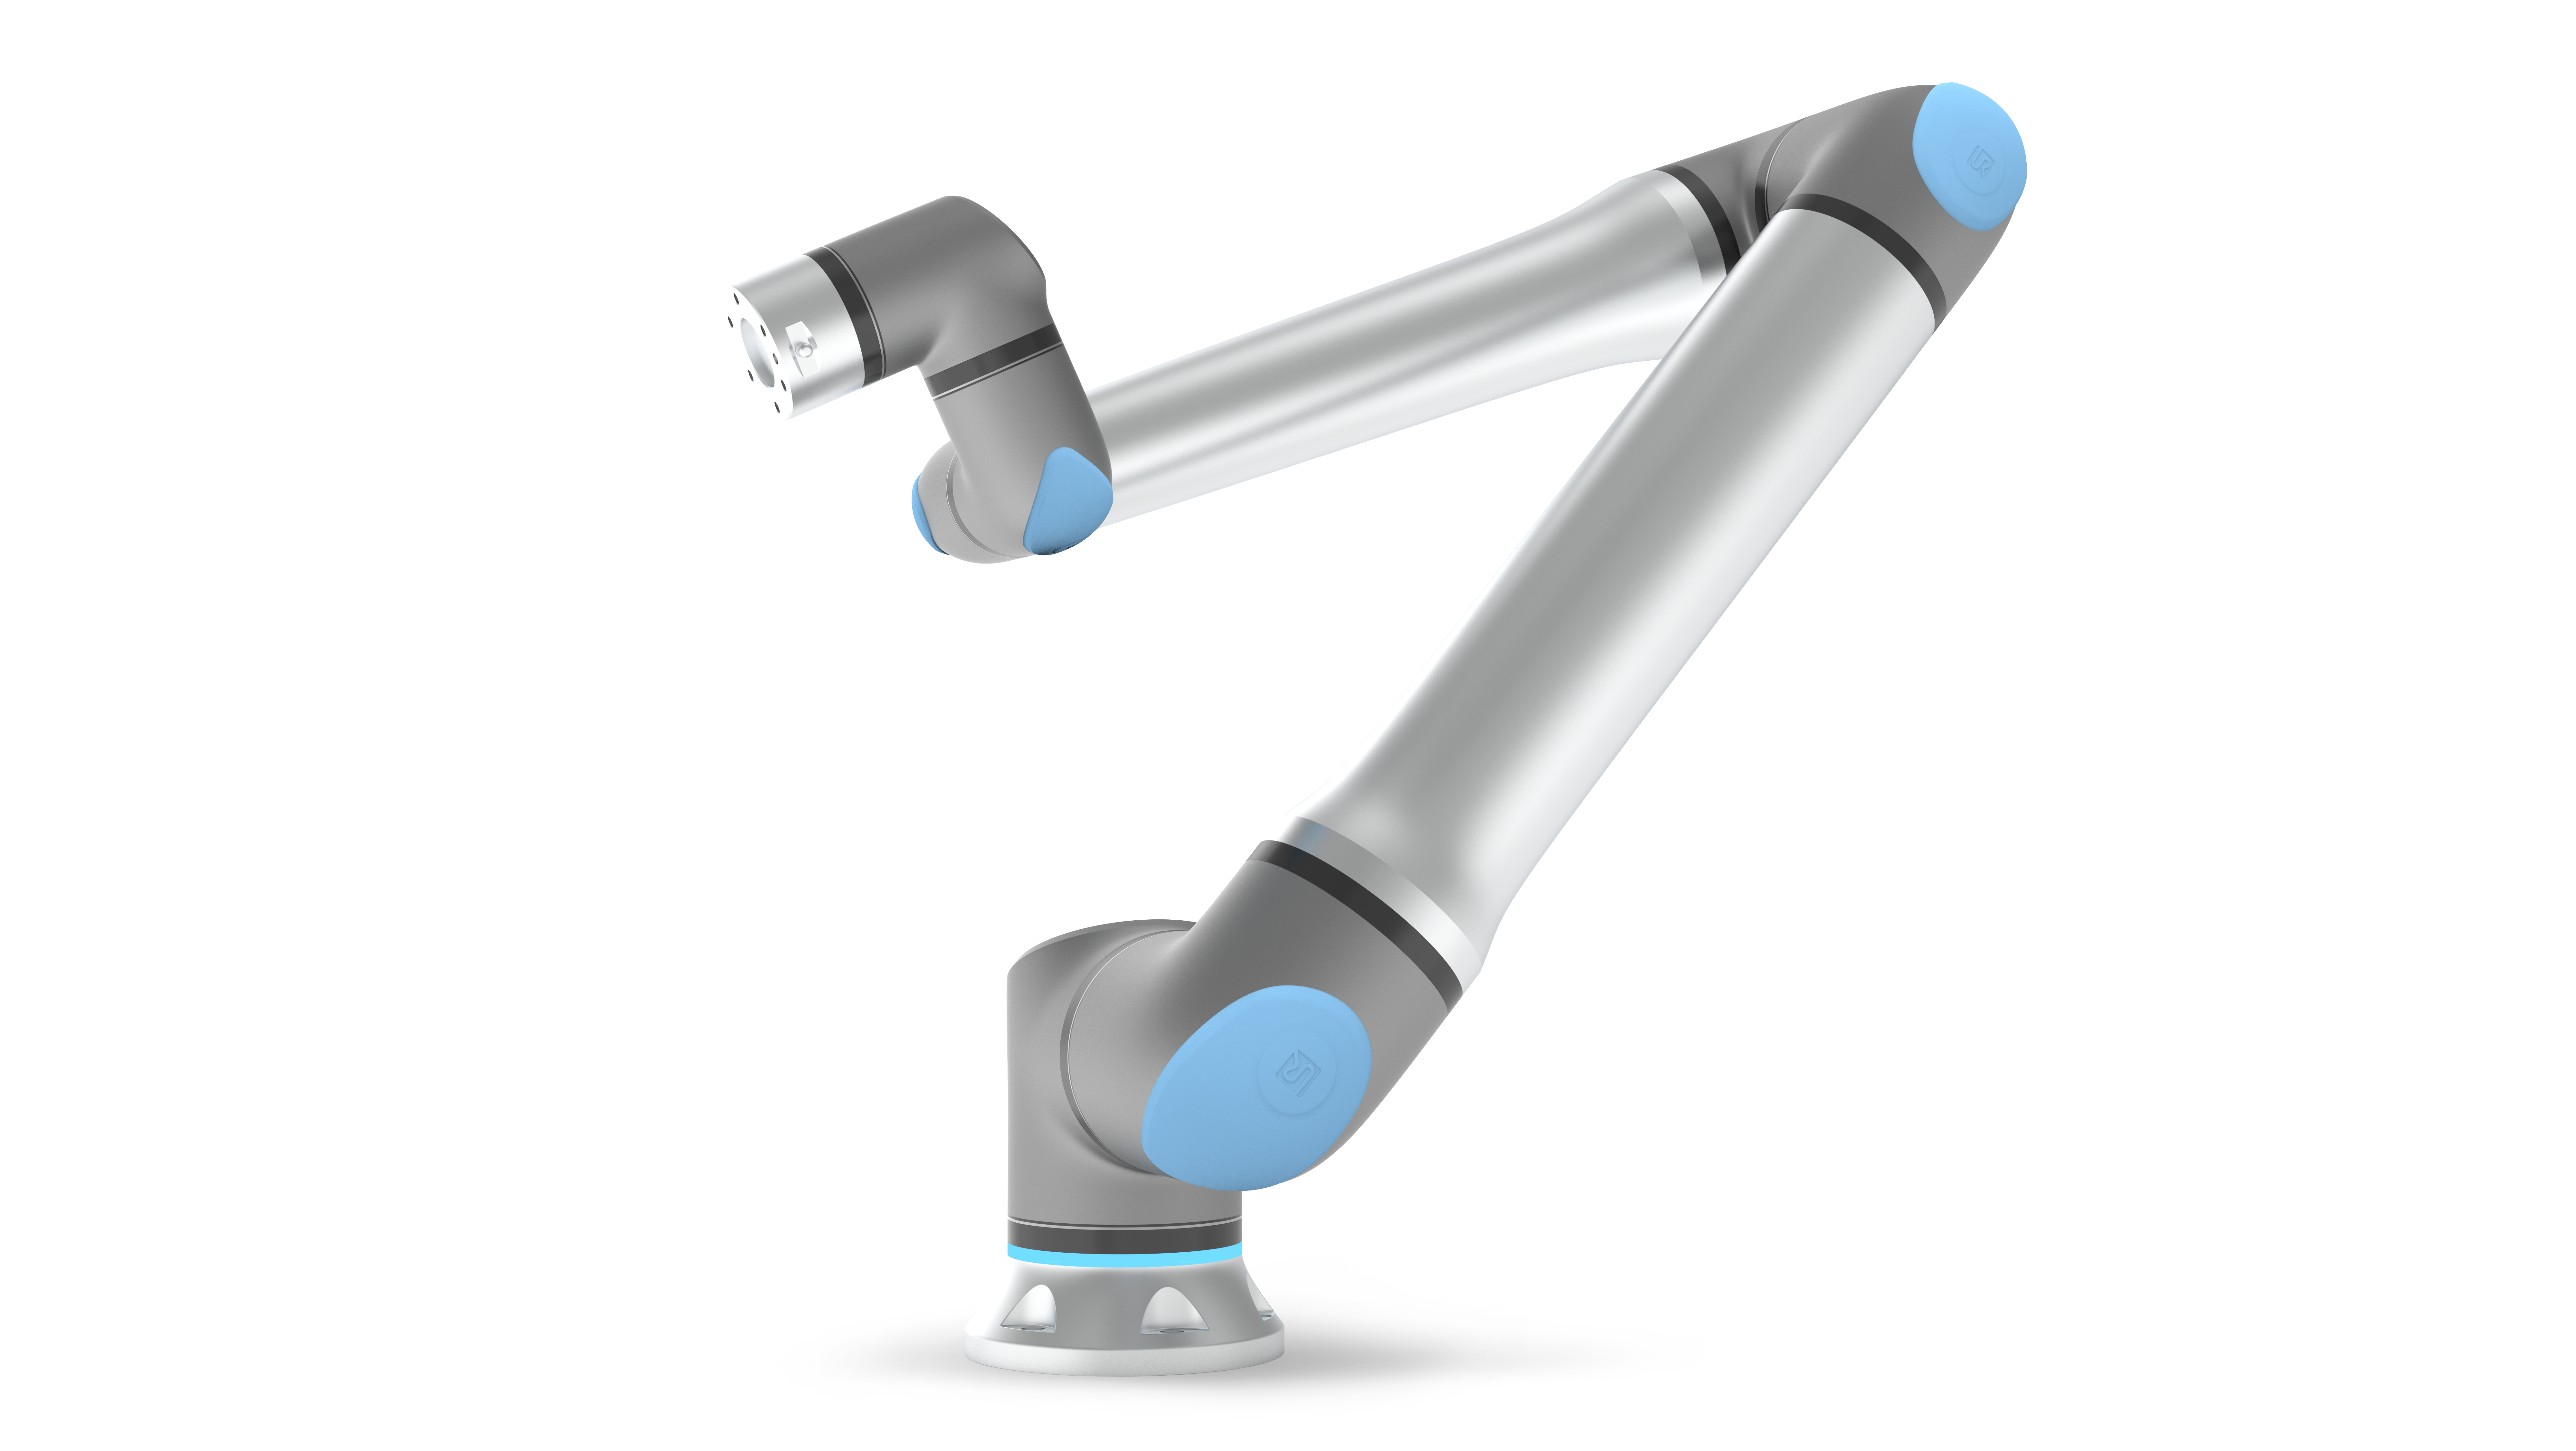 All-New UR20 Industrial Cobot